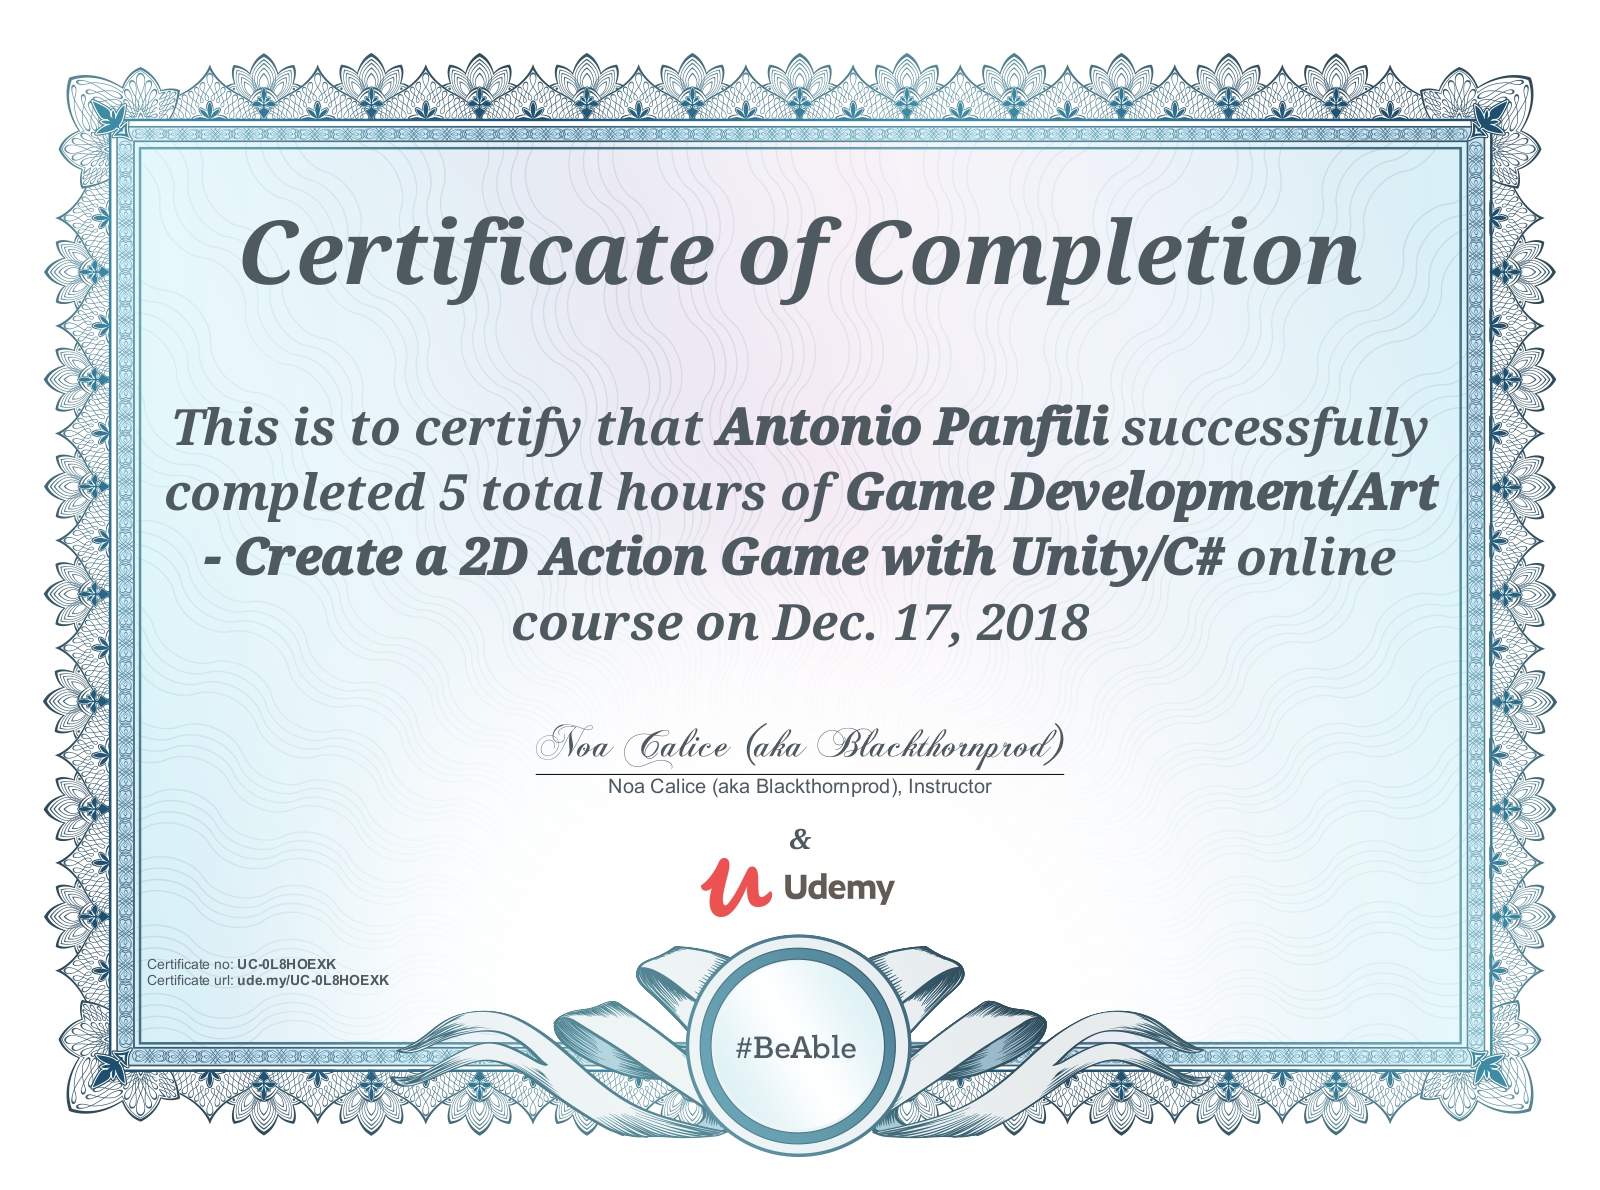 Certificato Game Development/Art - Create a 2D Action Game with Unity/C#